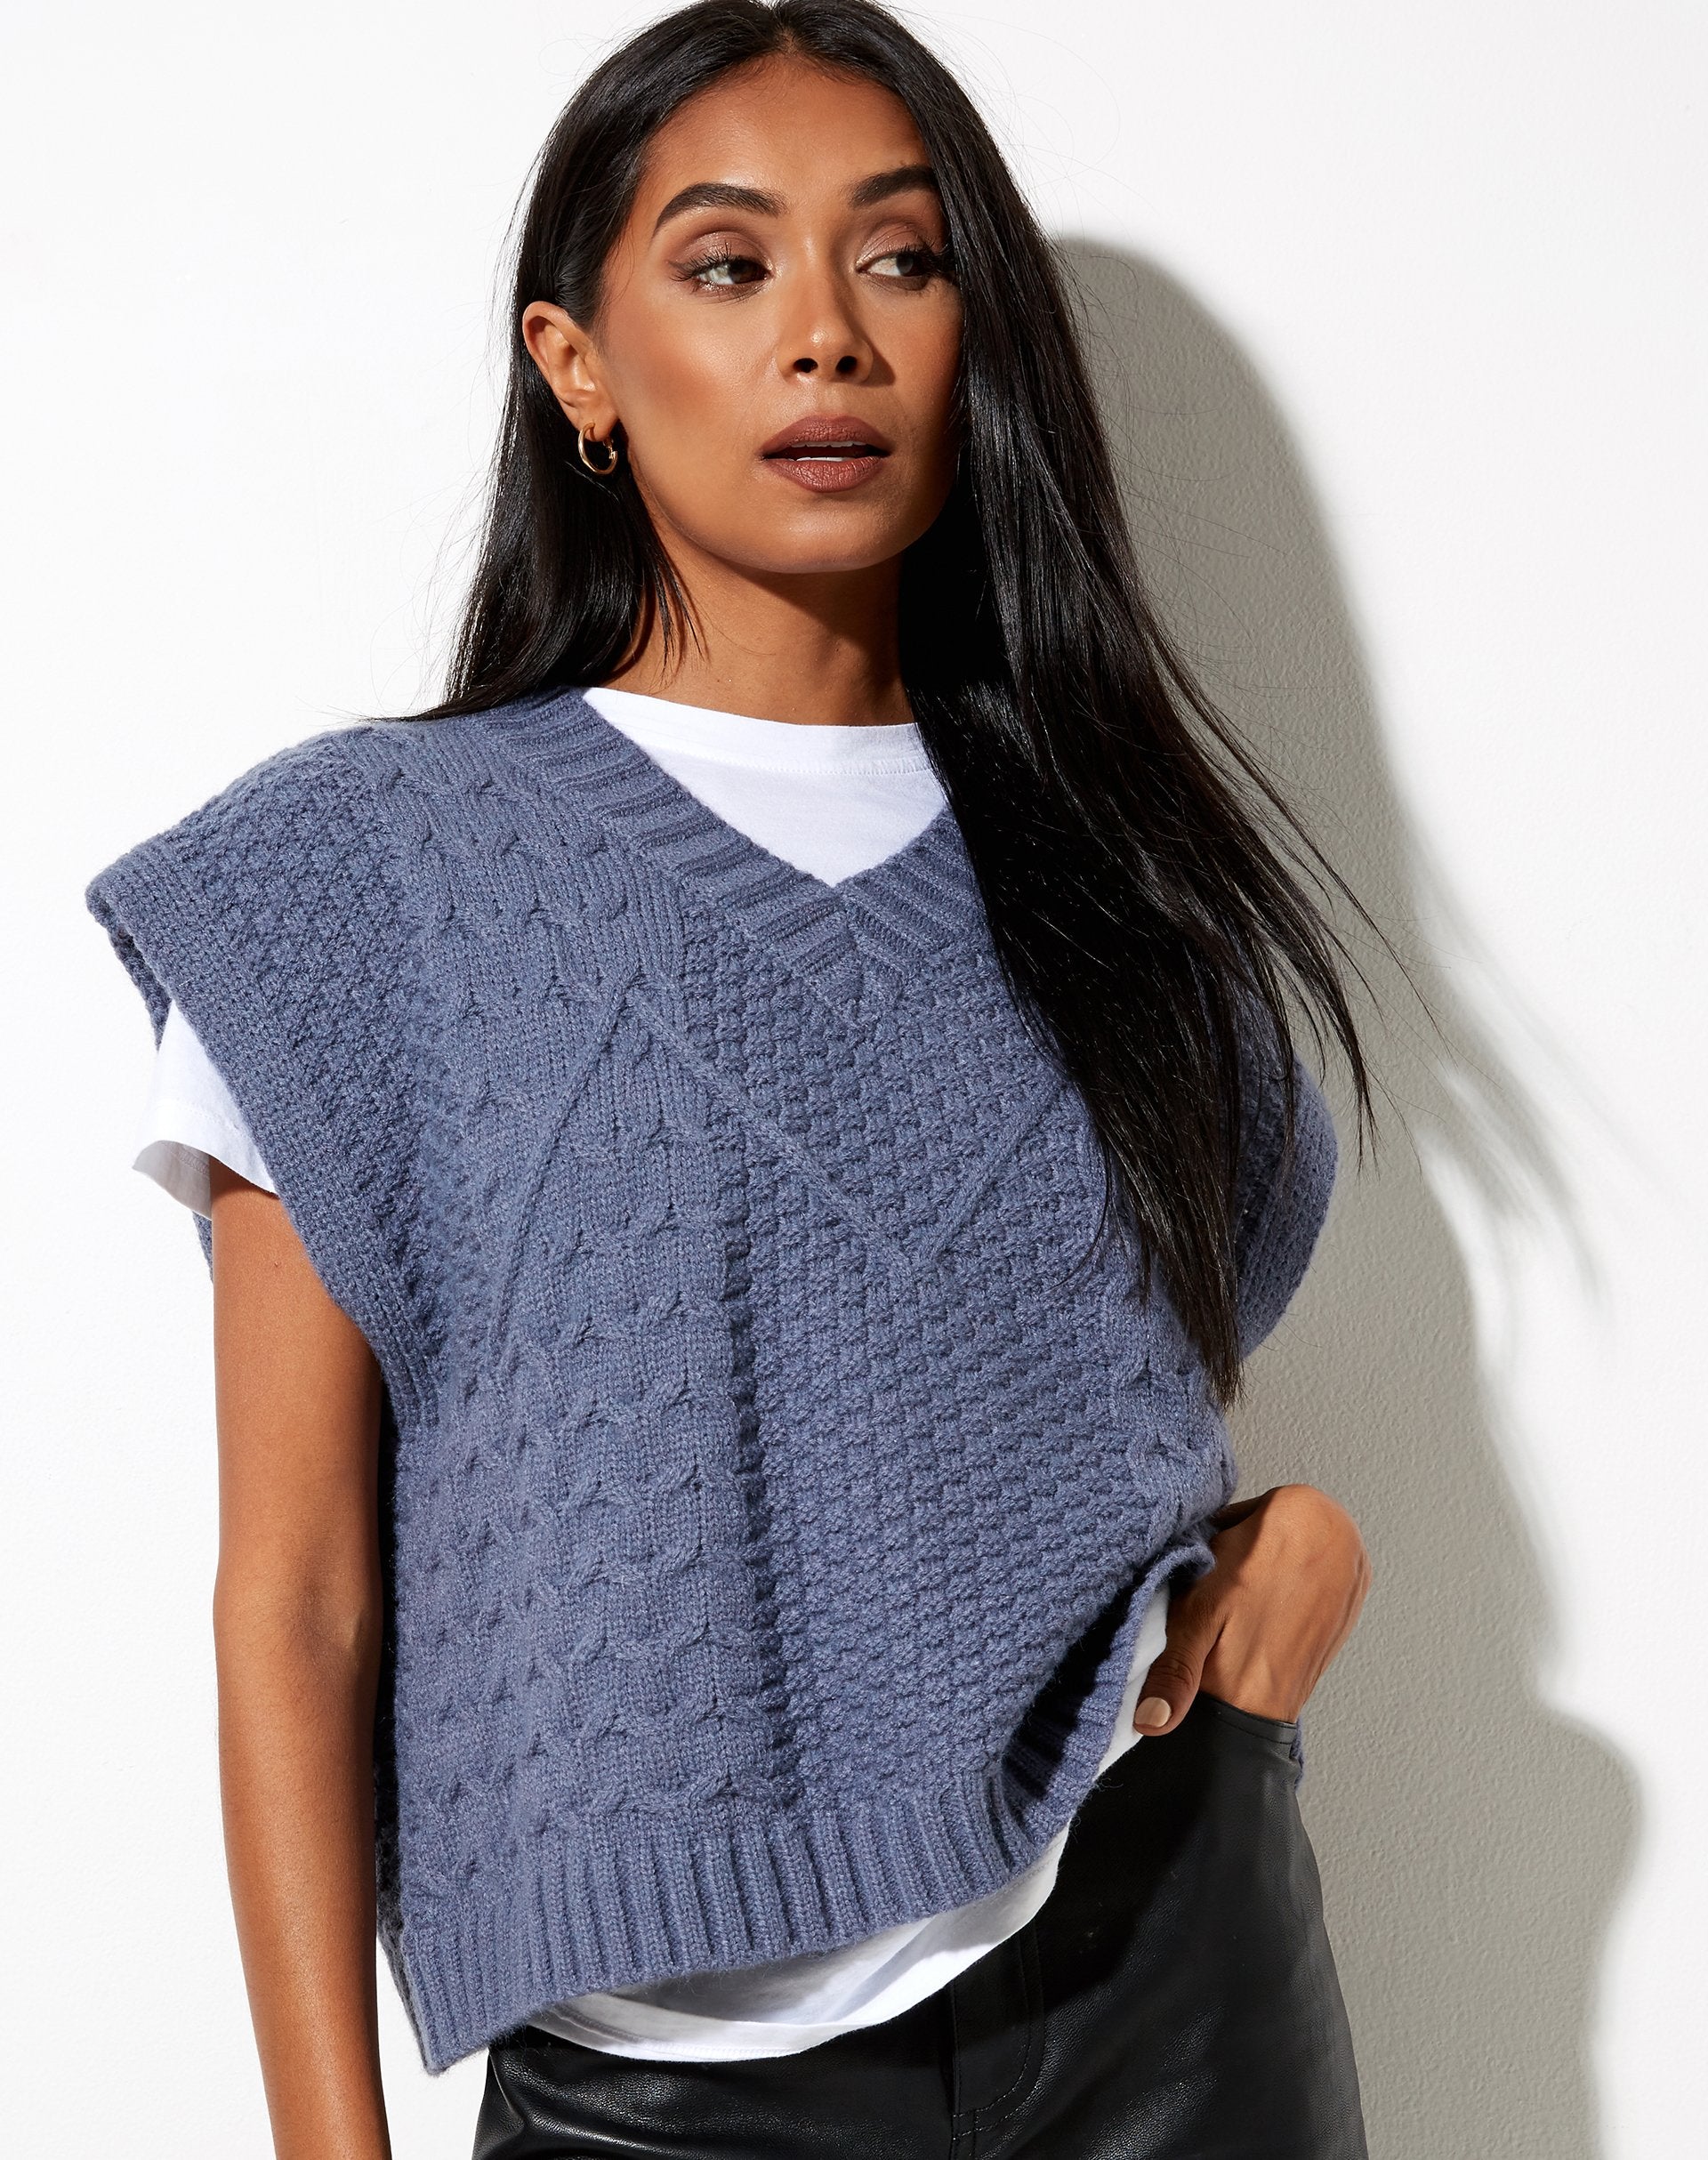 Image of Qinna Vest in Charcoal